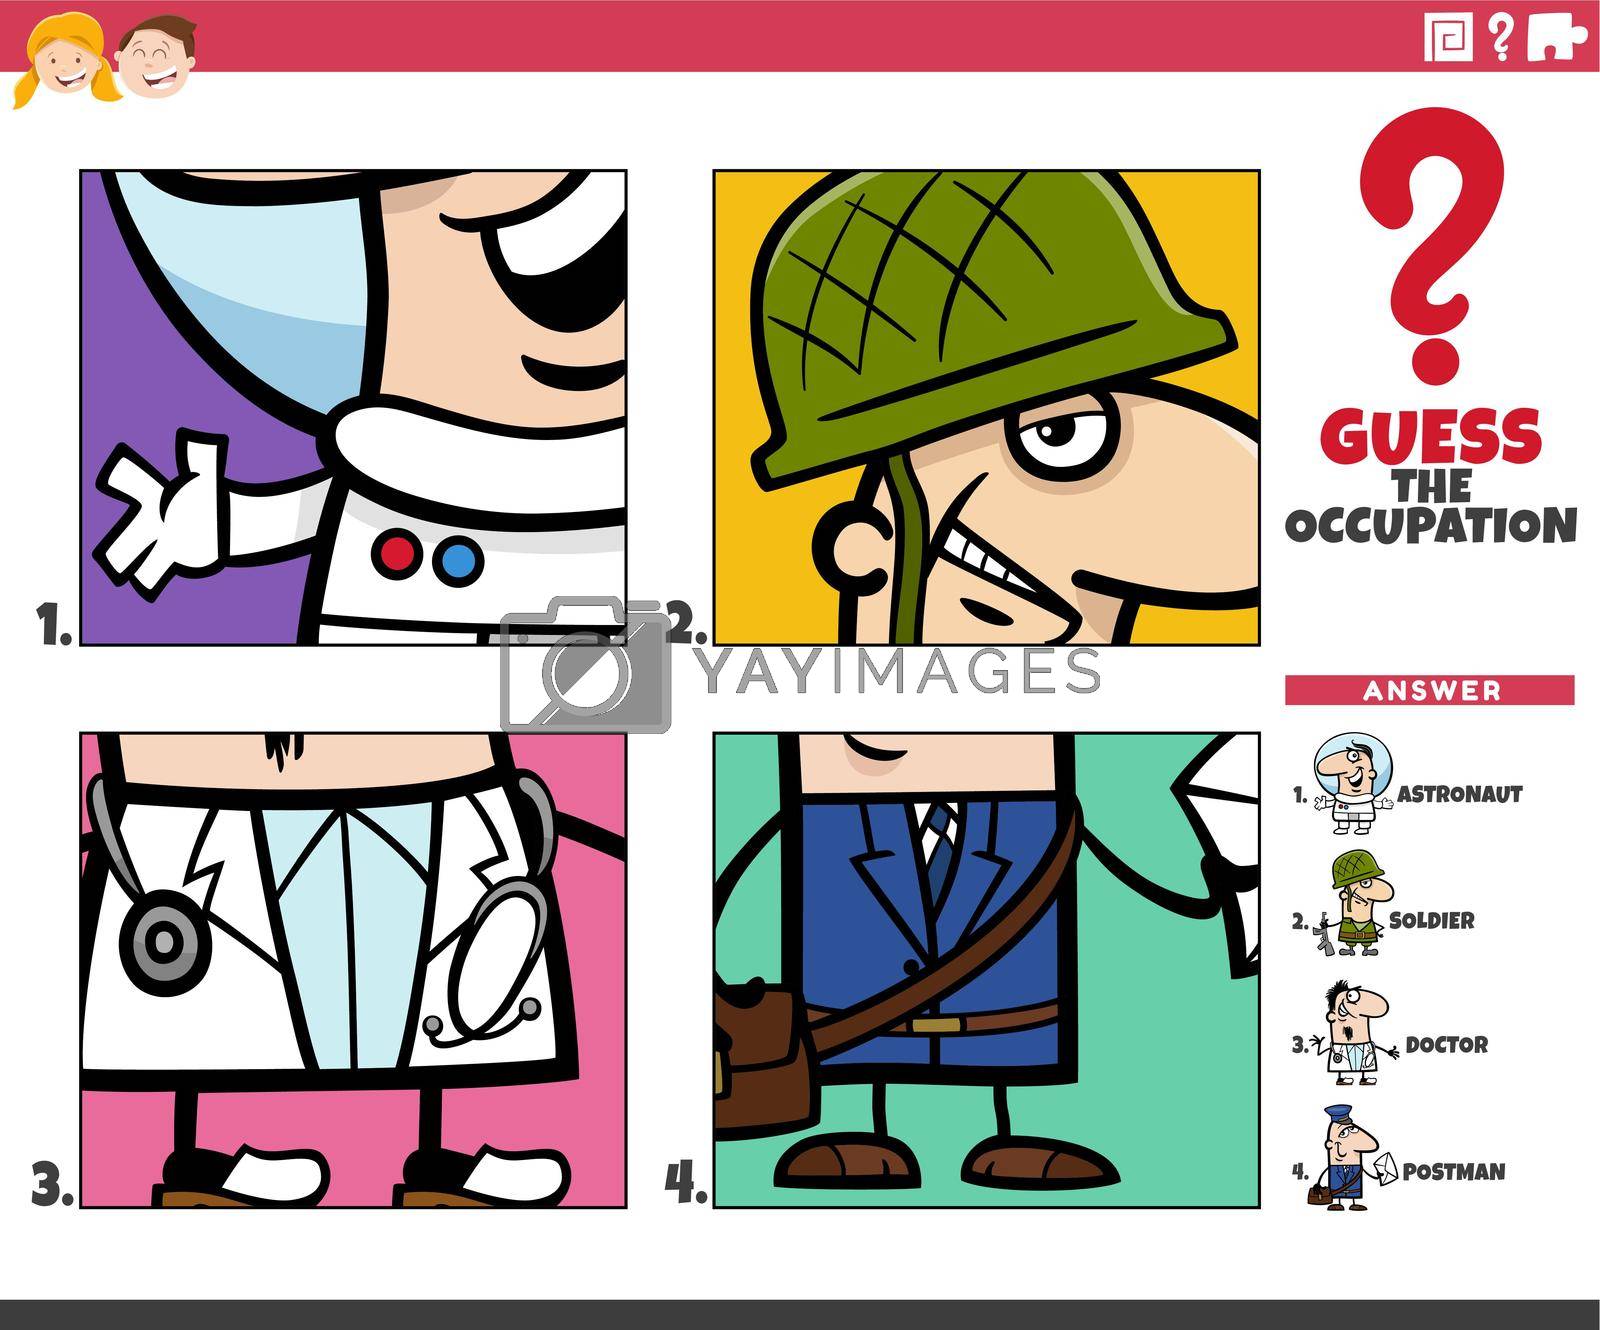 Royalty free image of guess the occupation cartoon educational task for children by izakowski